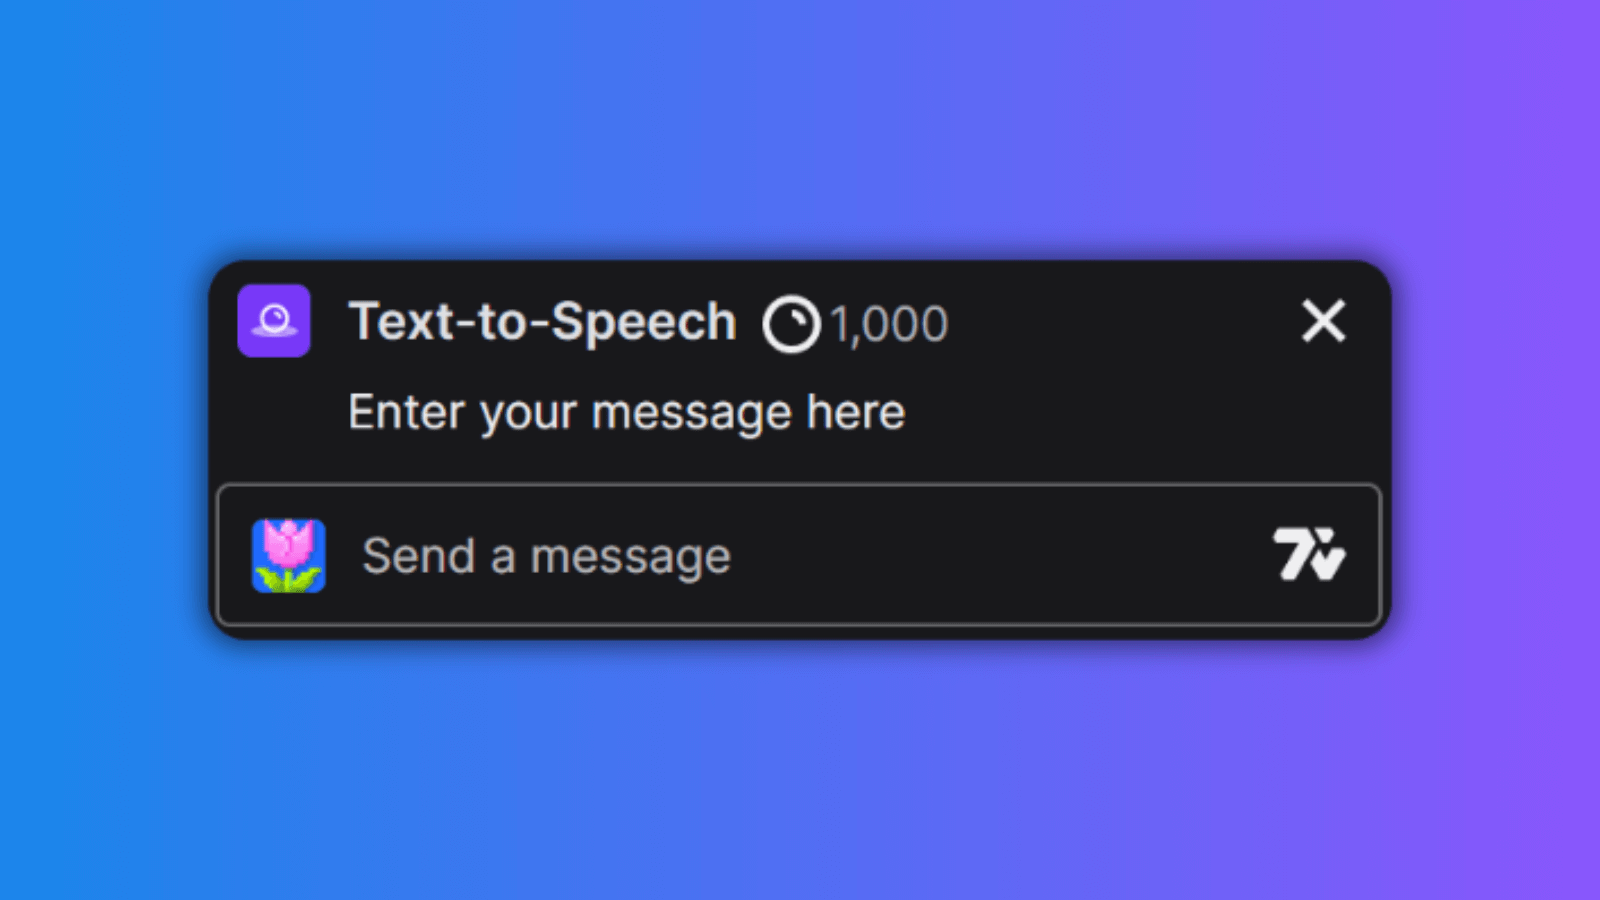 This image shows the Text-to-Speech for Channel Points interface under the Twitch chat.